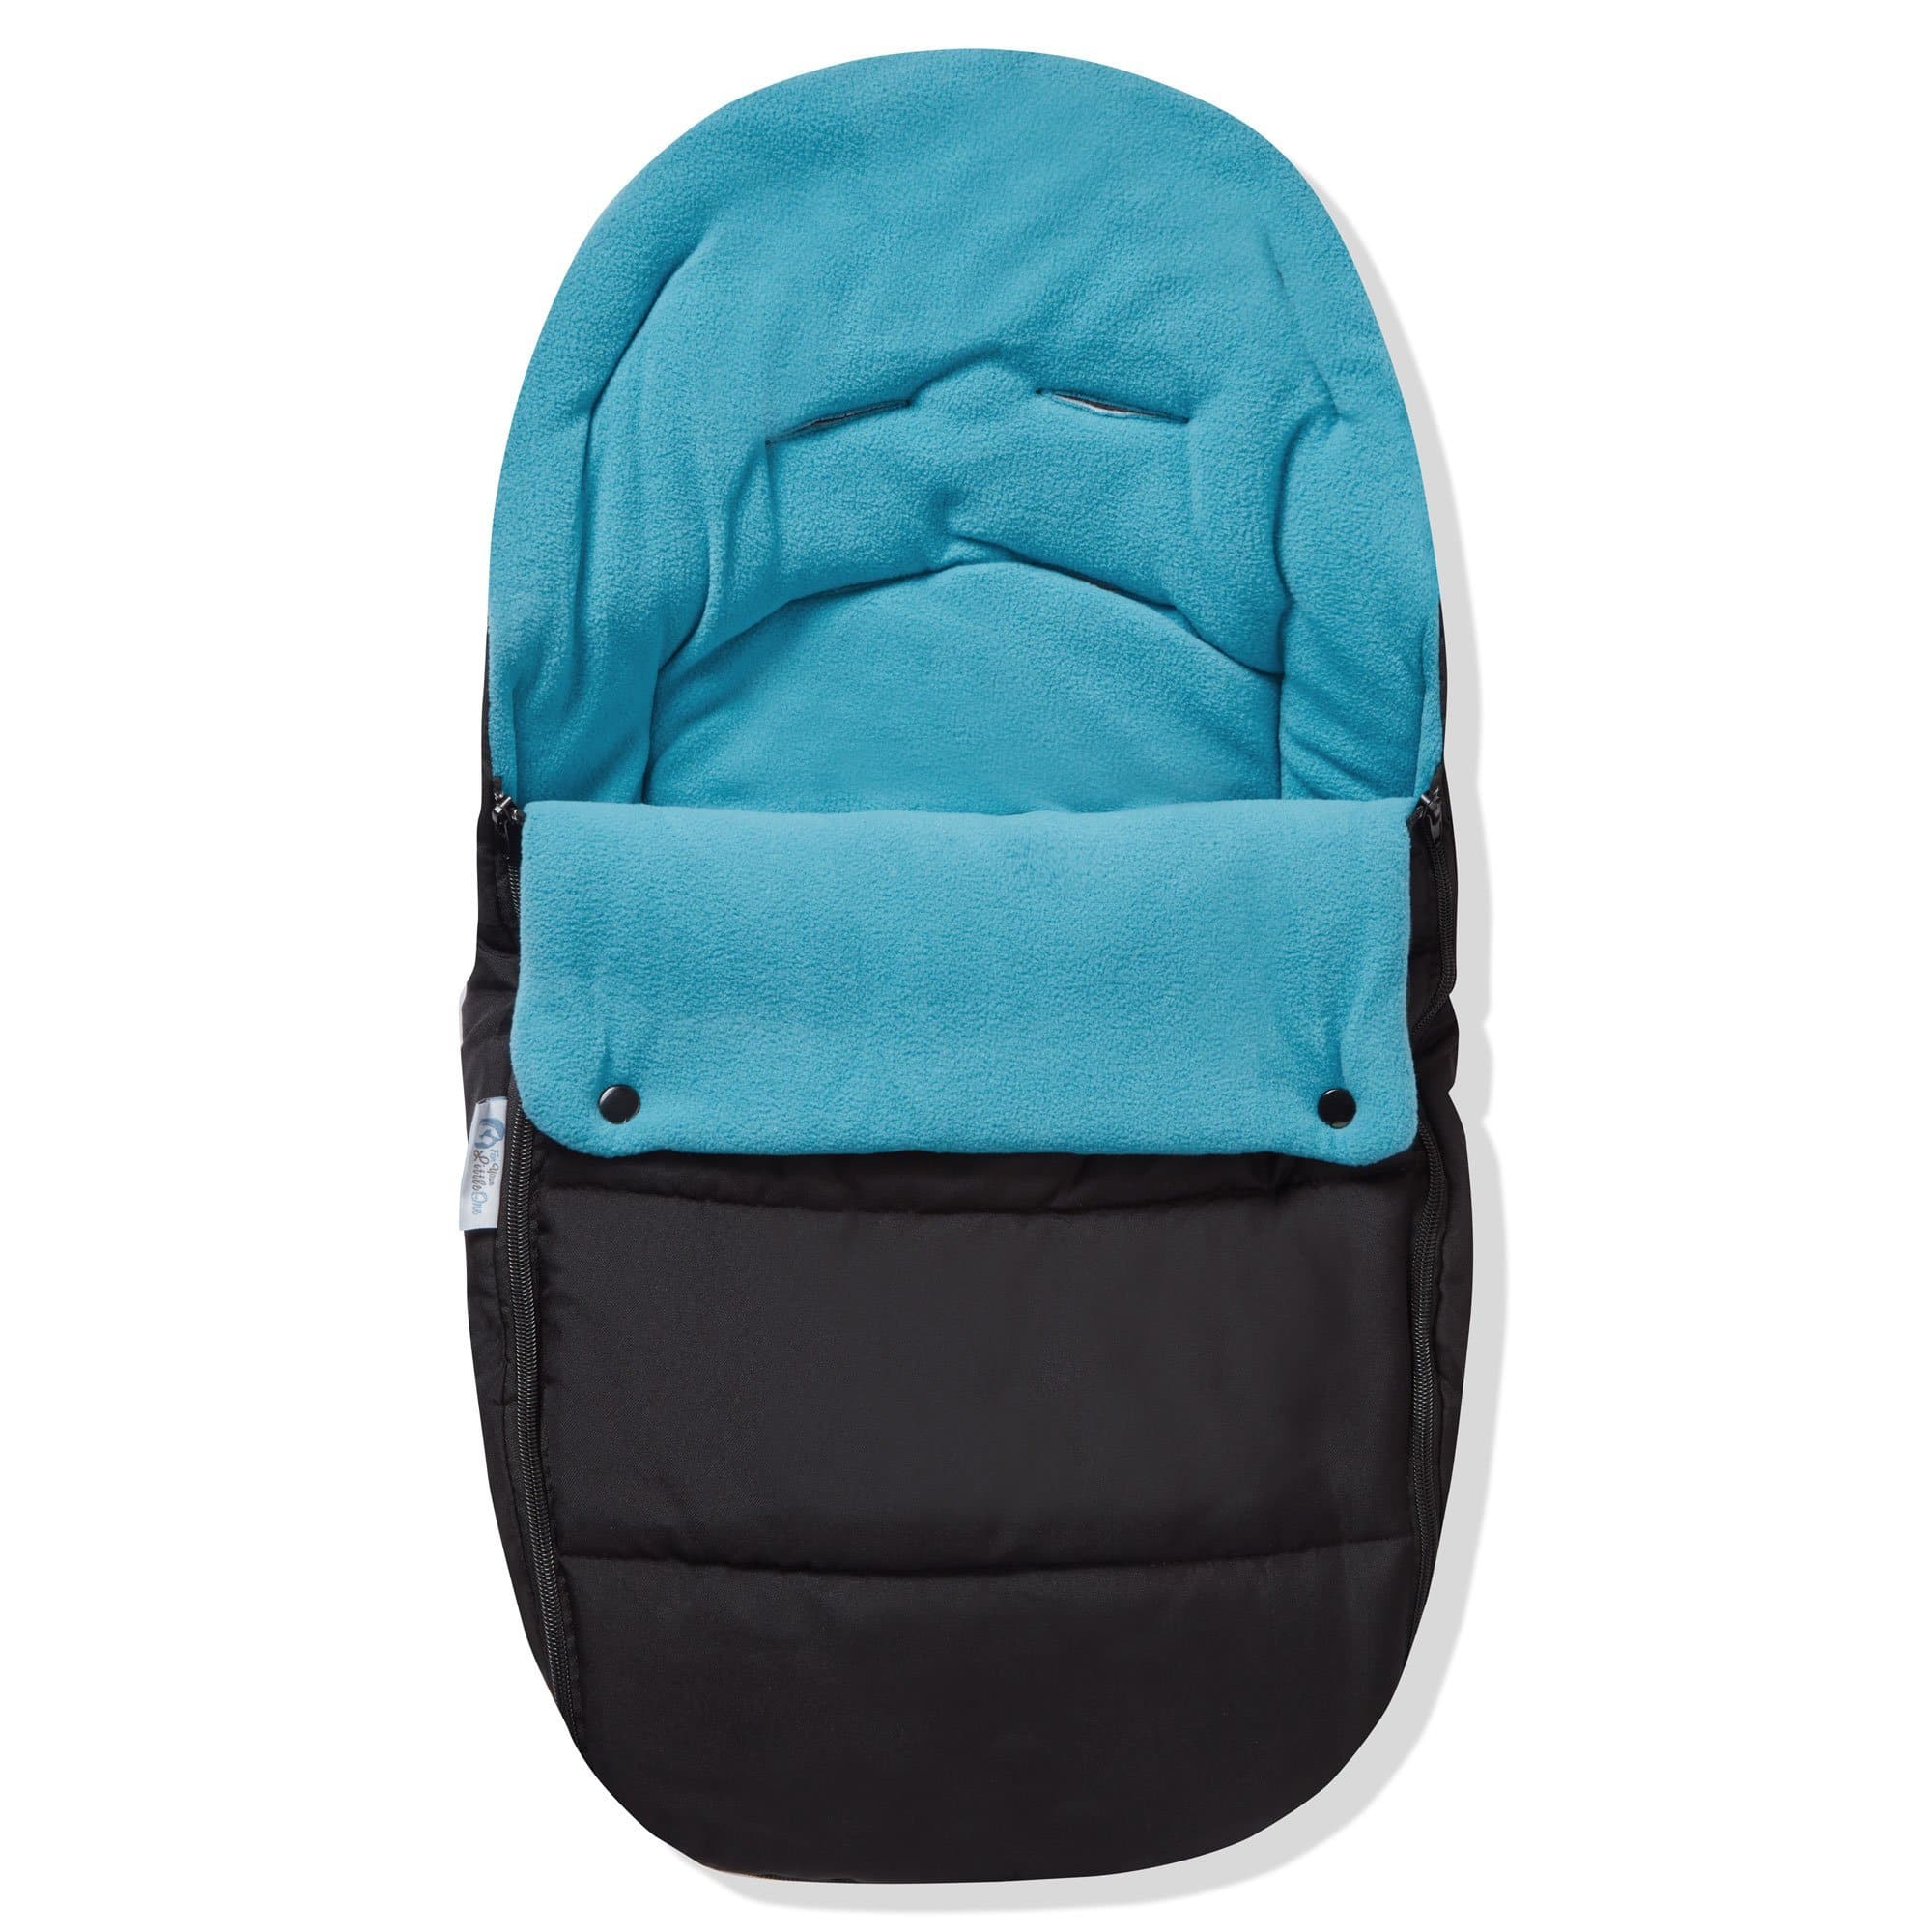 Premium Car Seat Footmuff / Cosy Toes Compatible with Kinderkraft - Ocean Blue / Fits All Models | For Your Little One